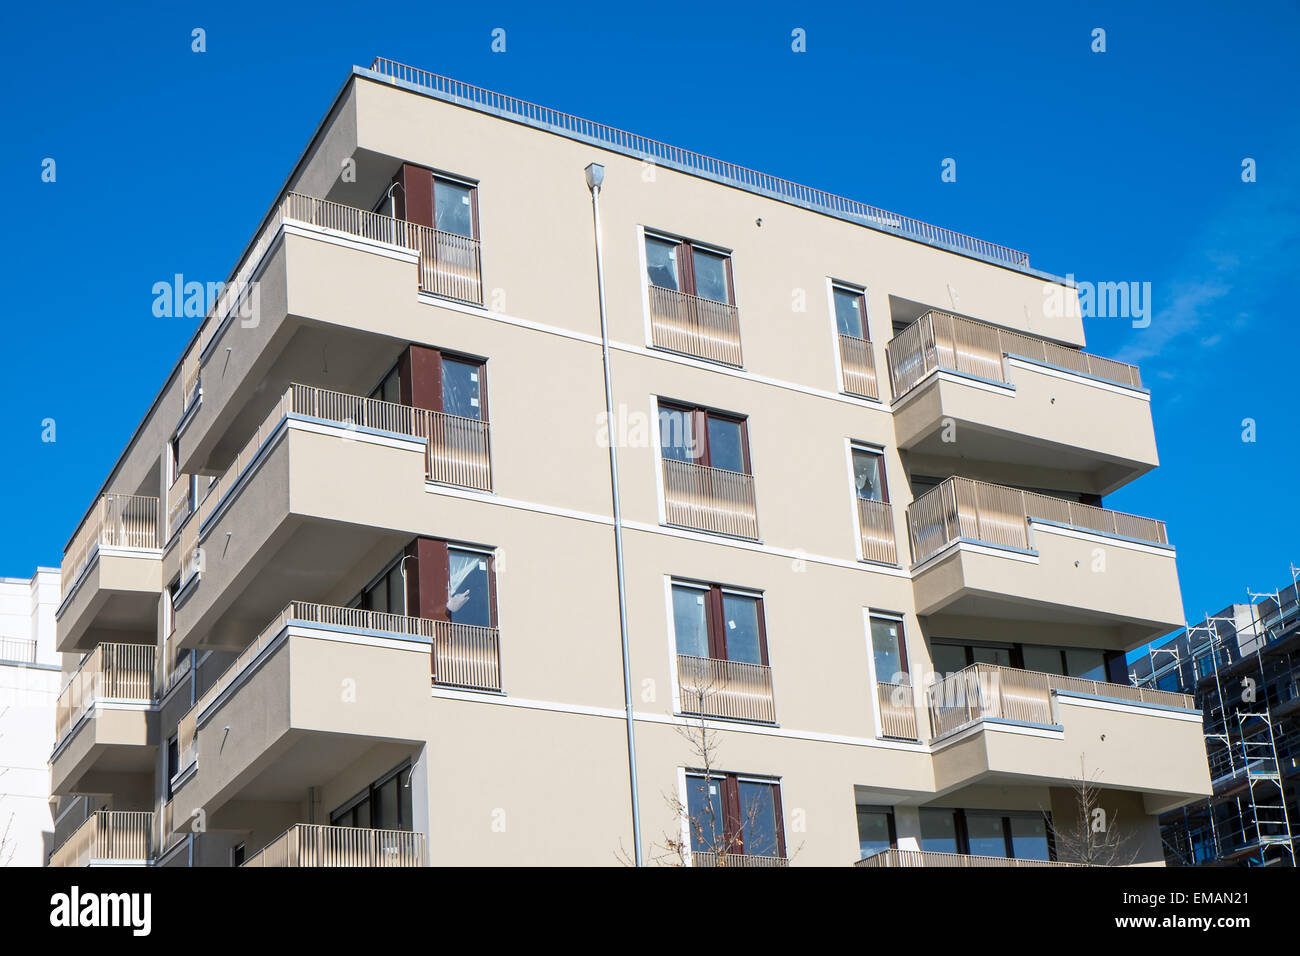 A new house with apartments seen in Berlin, Germany Stock Photo - Alamy